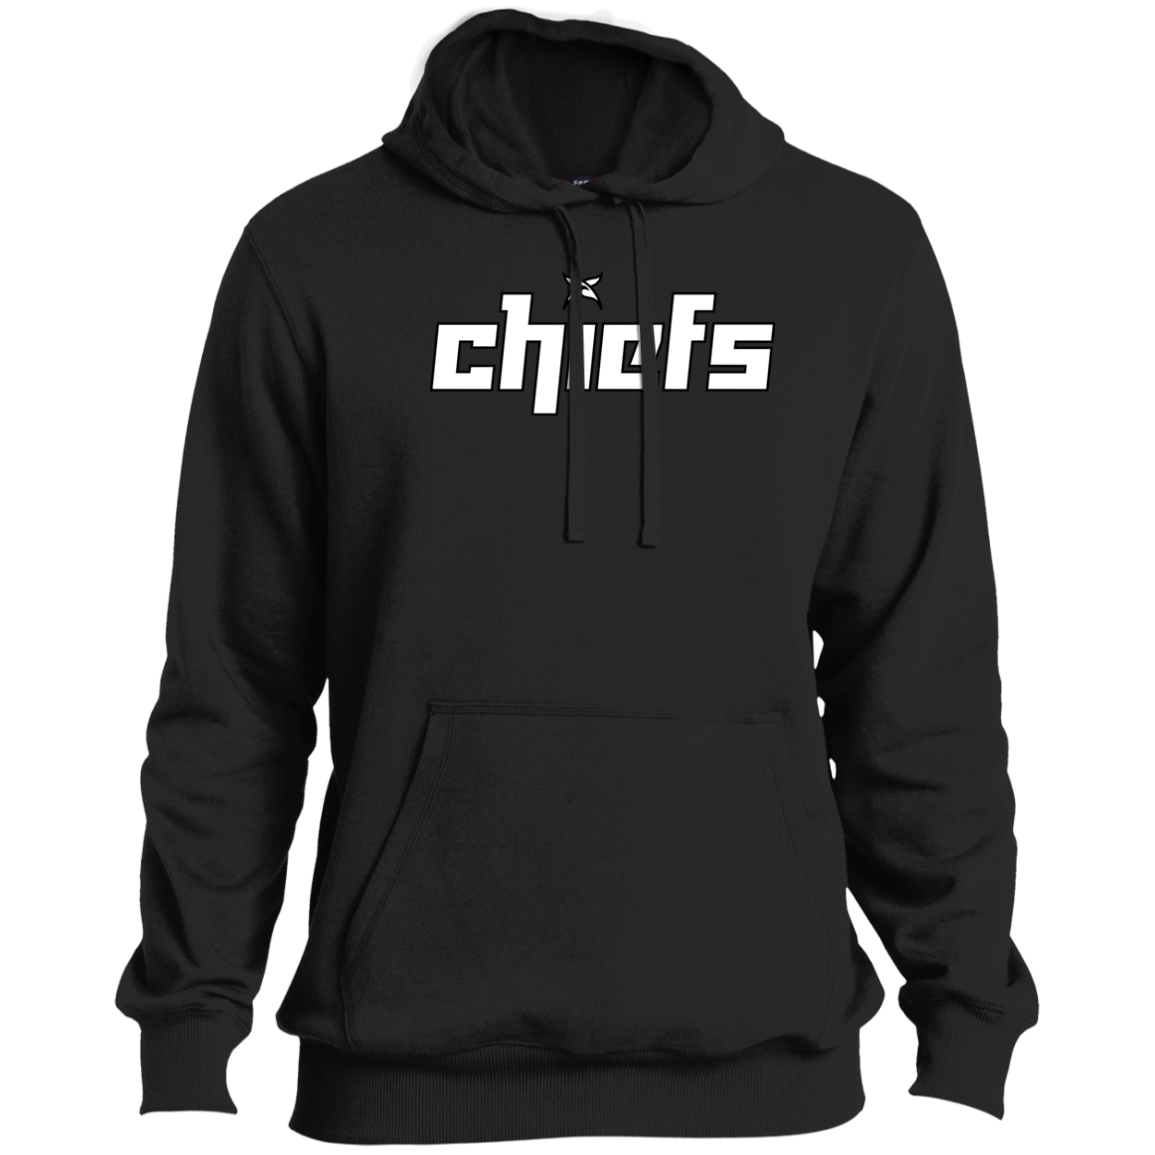 Chiefs (Tall Men's) Pullover Hoodie